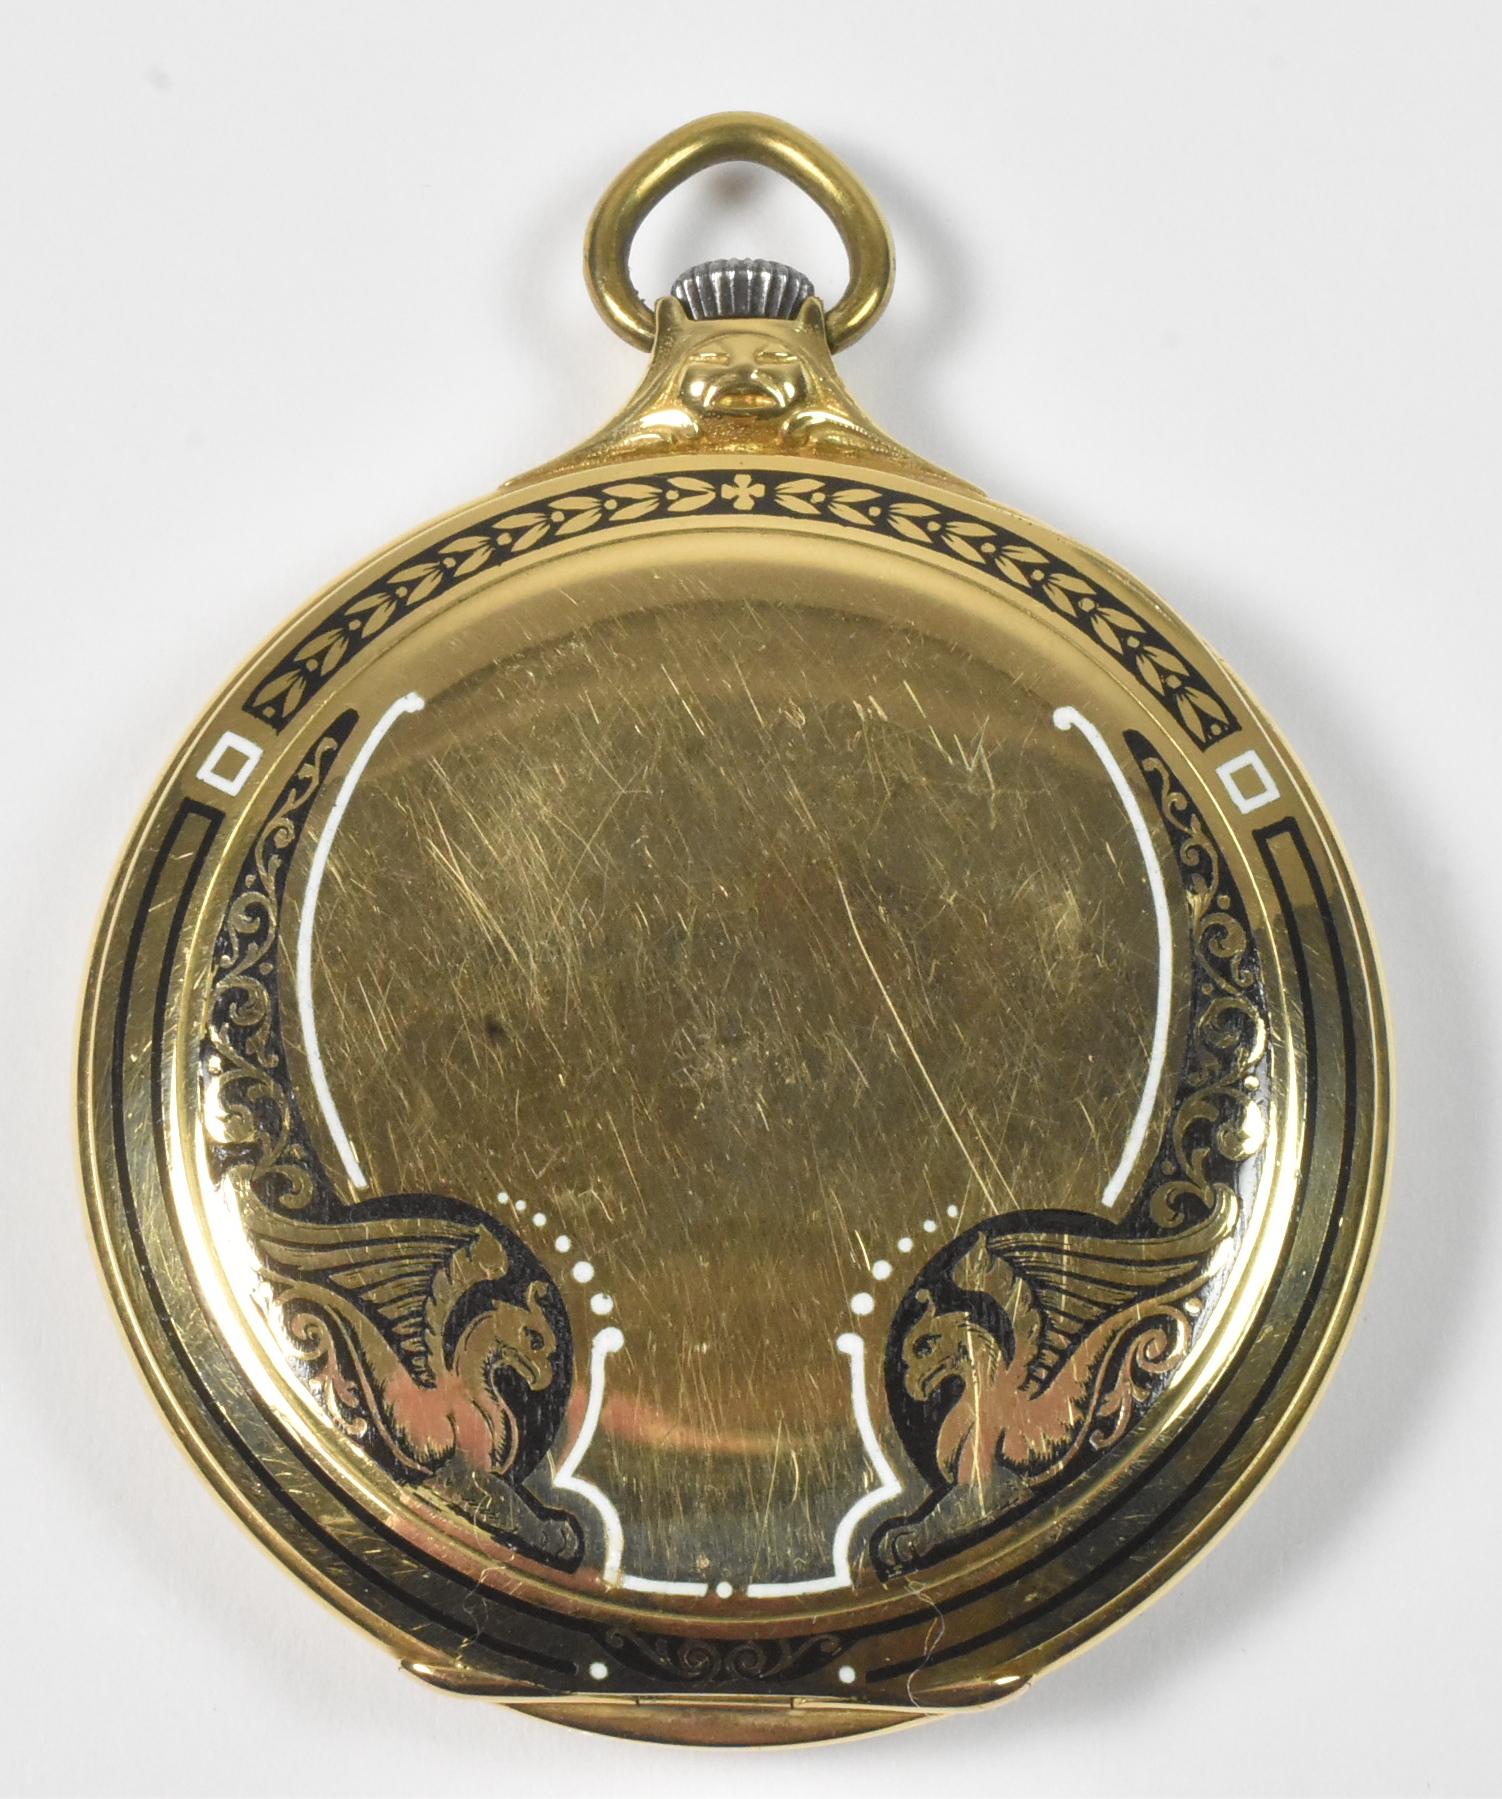 Movado of Enamel 18K Pocket Watch. 20th century. Enameled front and back case. Winged griffins and wheat borders designs. 15 Jewel Movement. Serial Number 34978. Case is marked 750. Some wear to the crown 44mm case. 36mm Movement. Running condition. 